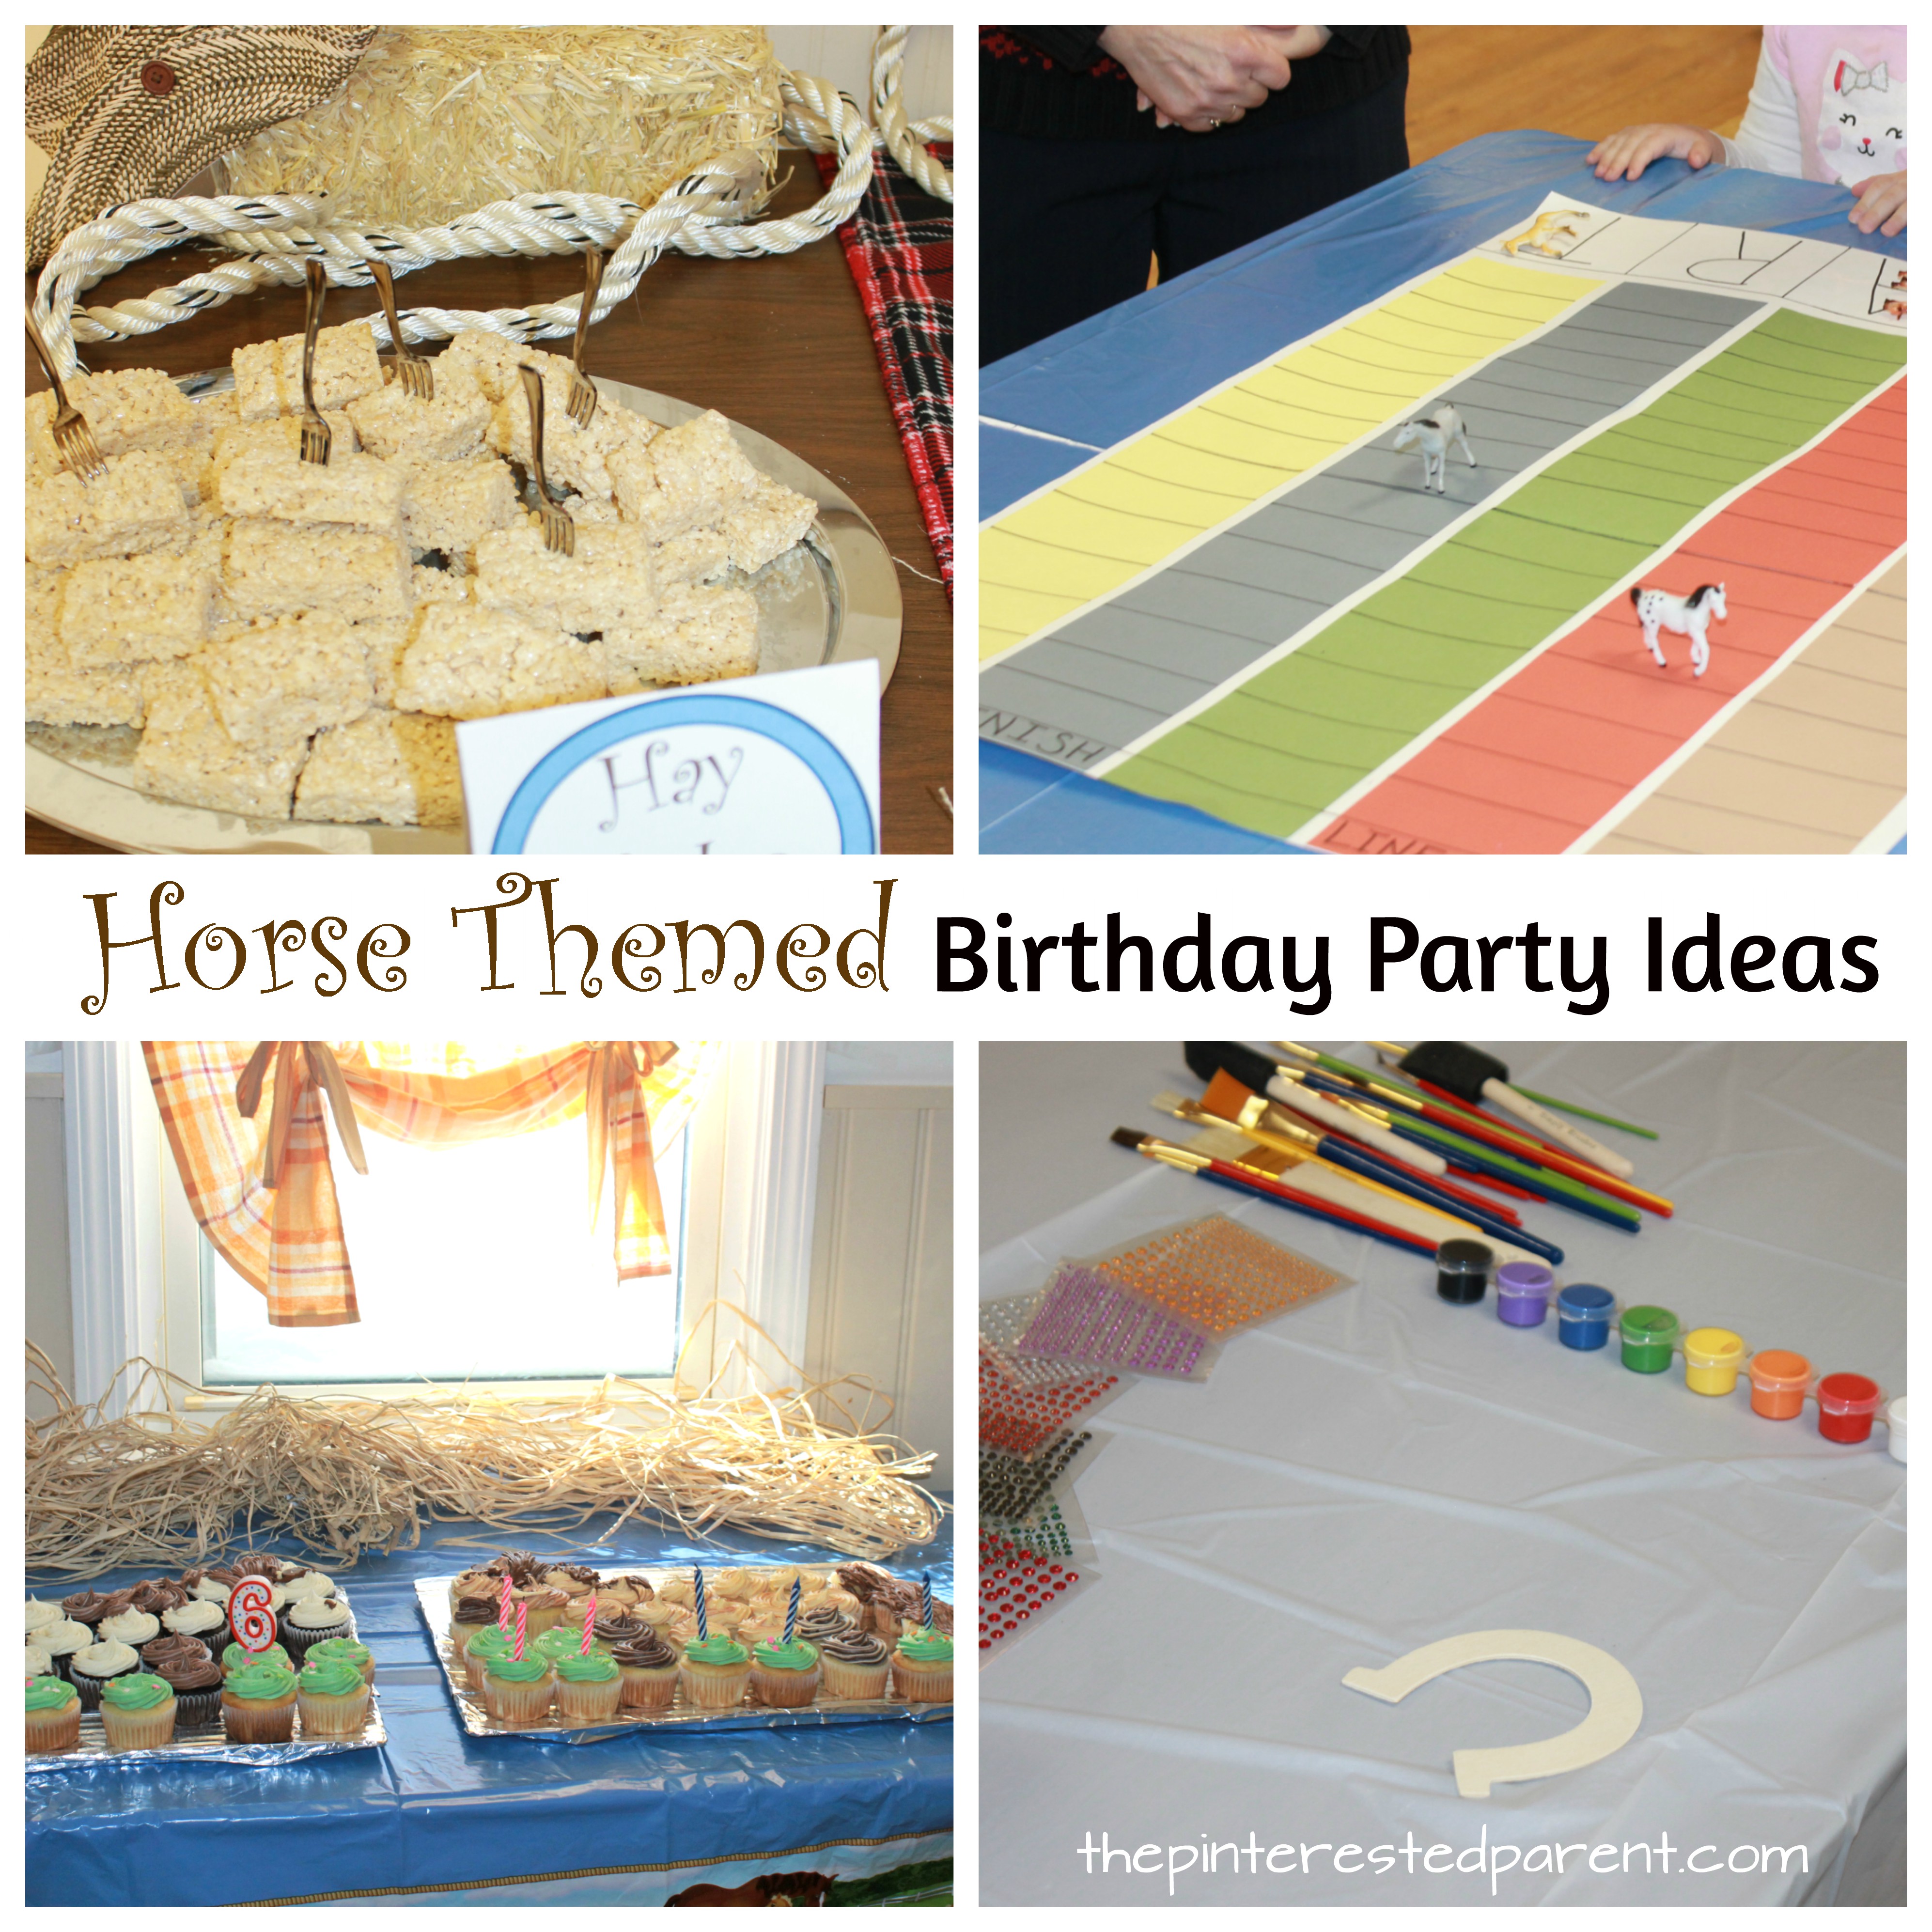 Horse themed party ideas for a kid's birthday party. Decorations and activities for a fun party. Spirit Riding Free